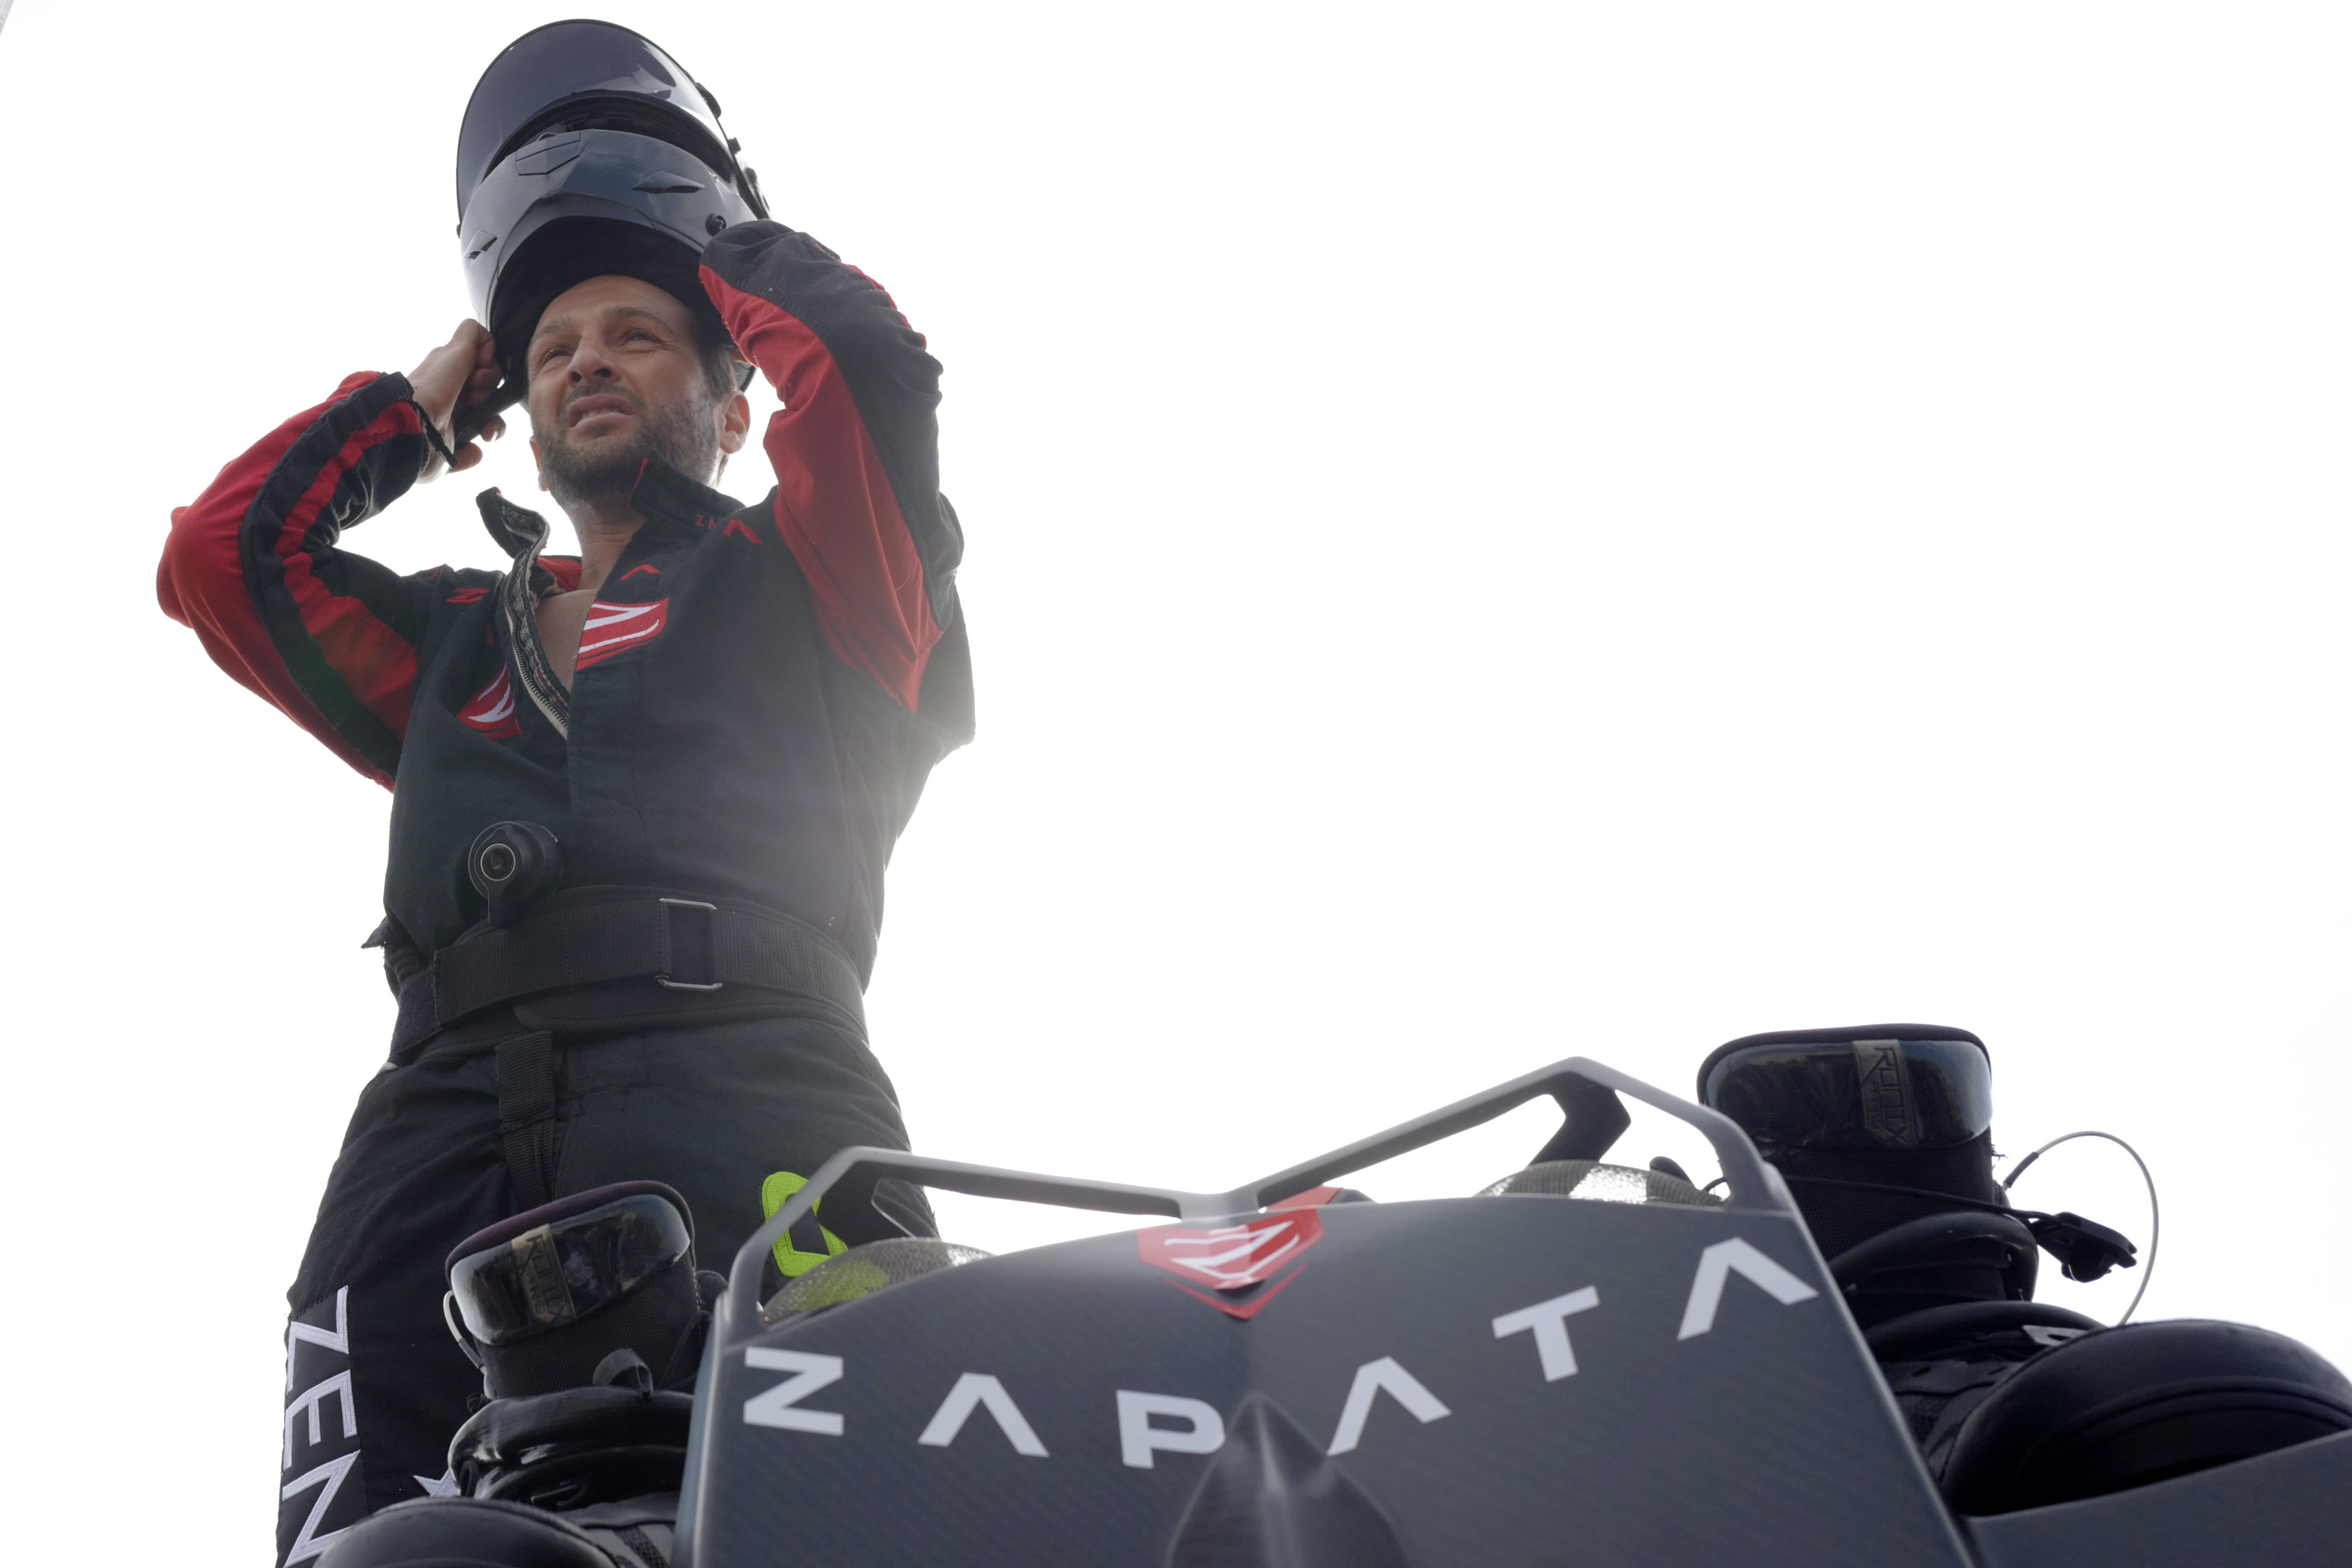 Frenchman to try flying across Channel on his flyboard